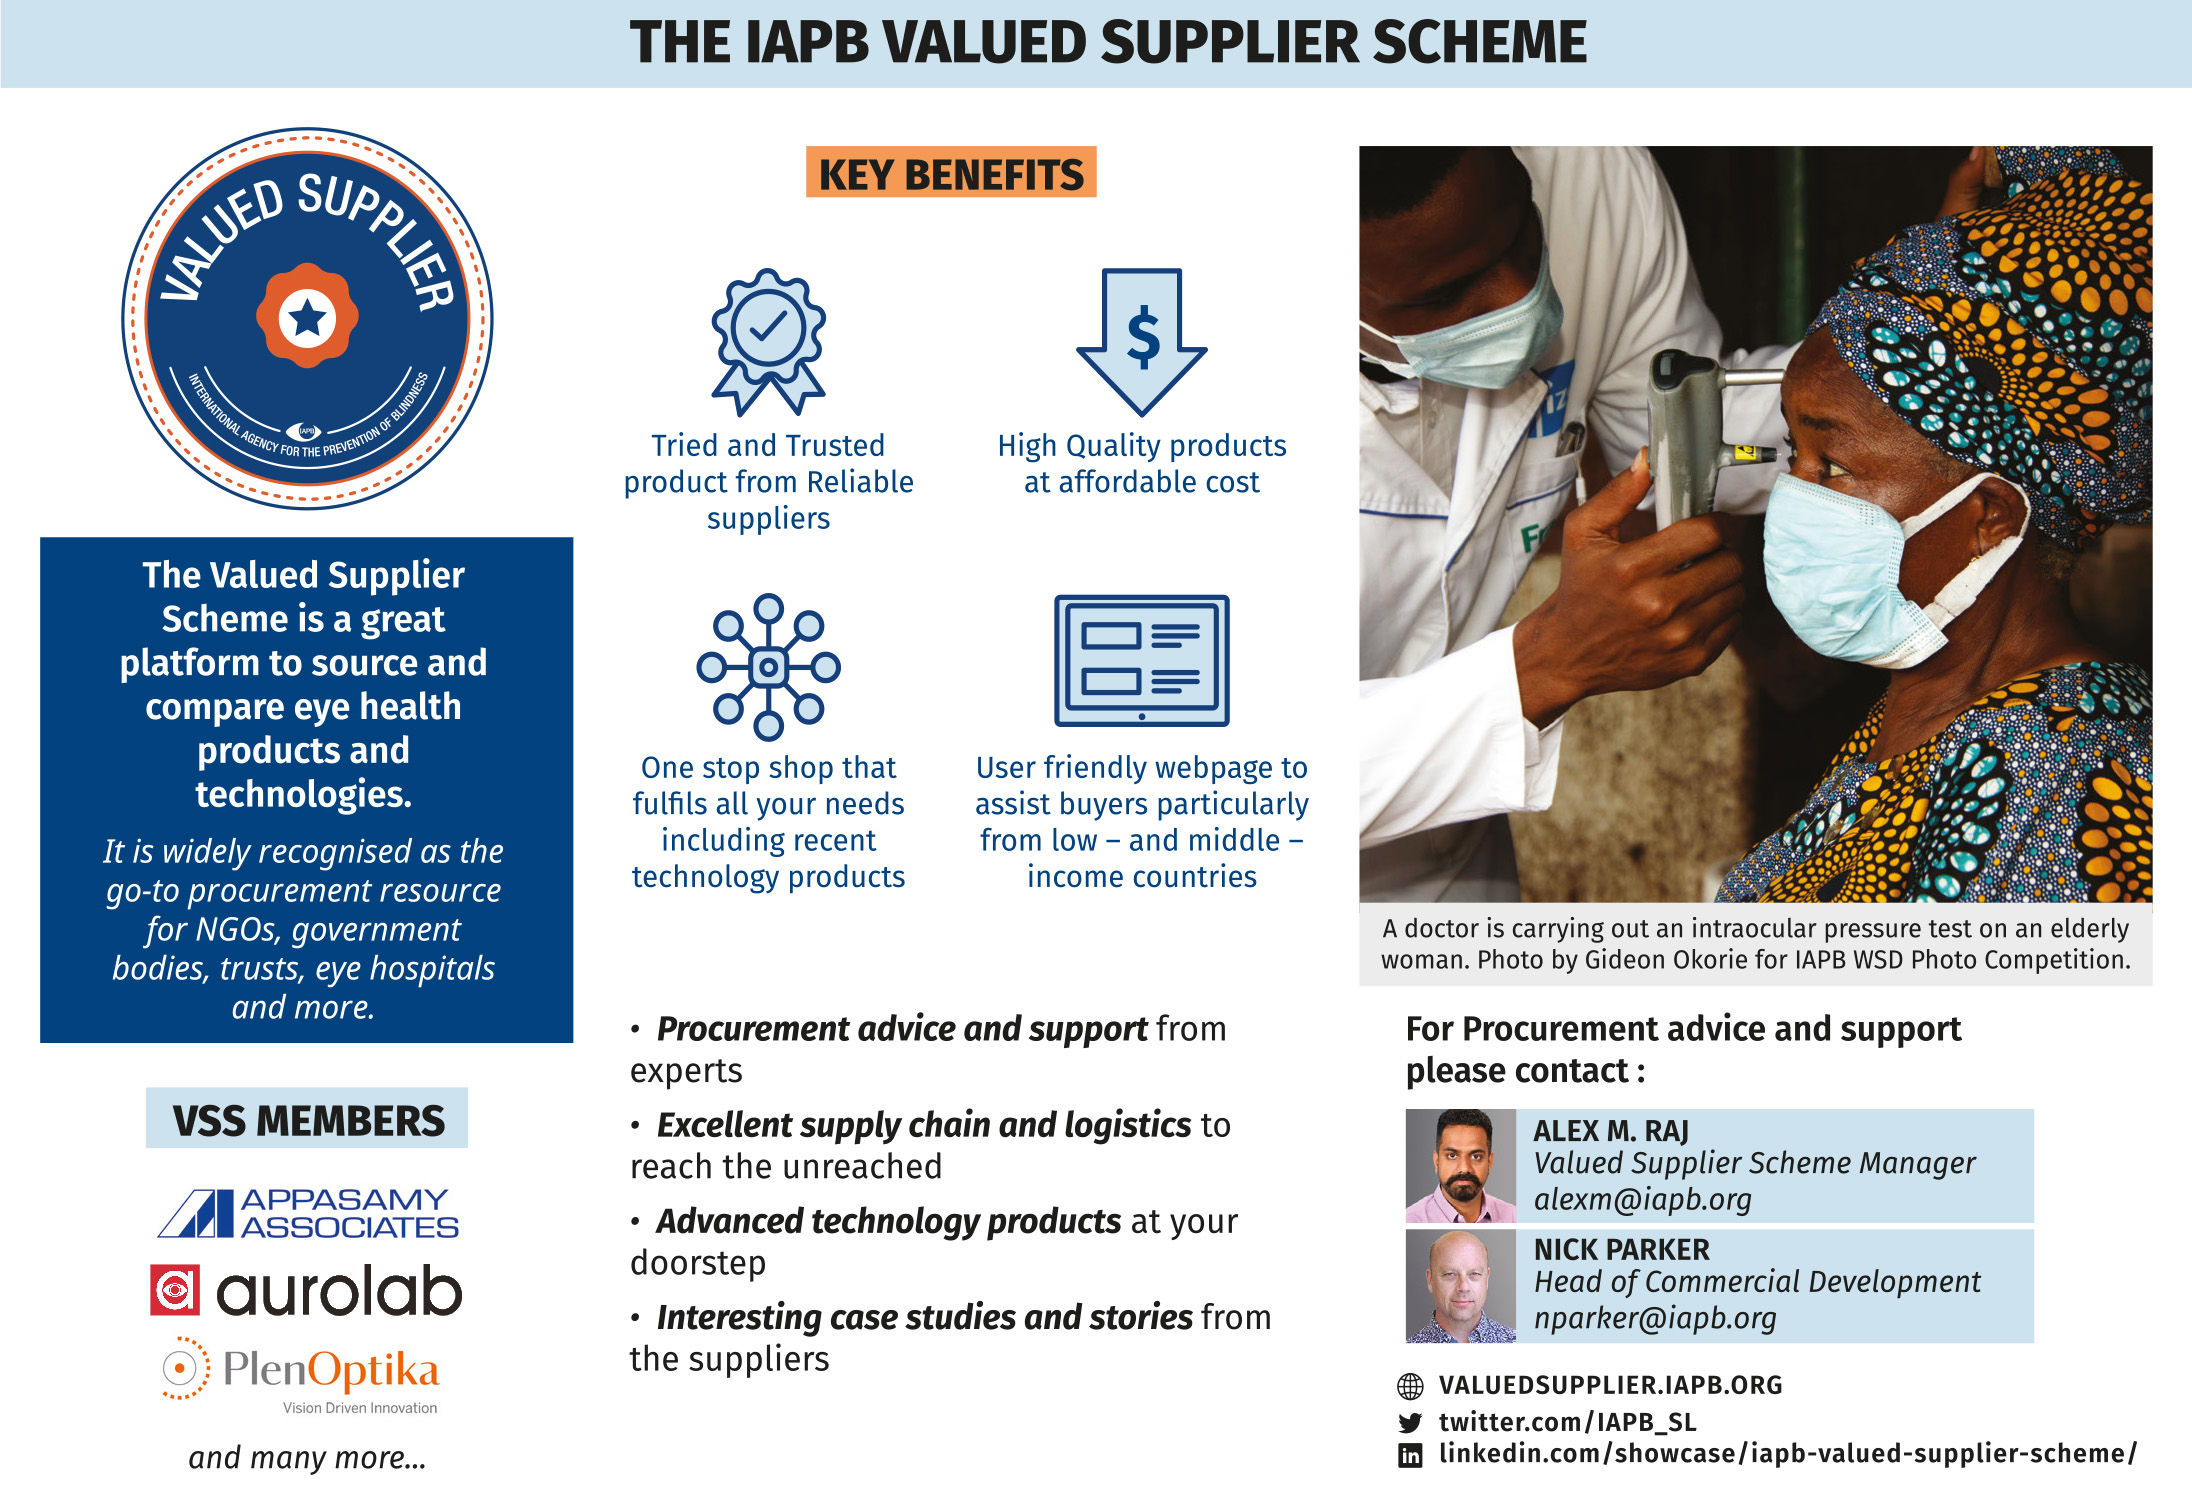 An advert for the IAPB valued supplier scheme listing the suppliers involved and the key benefits of the scheme